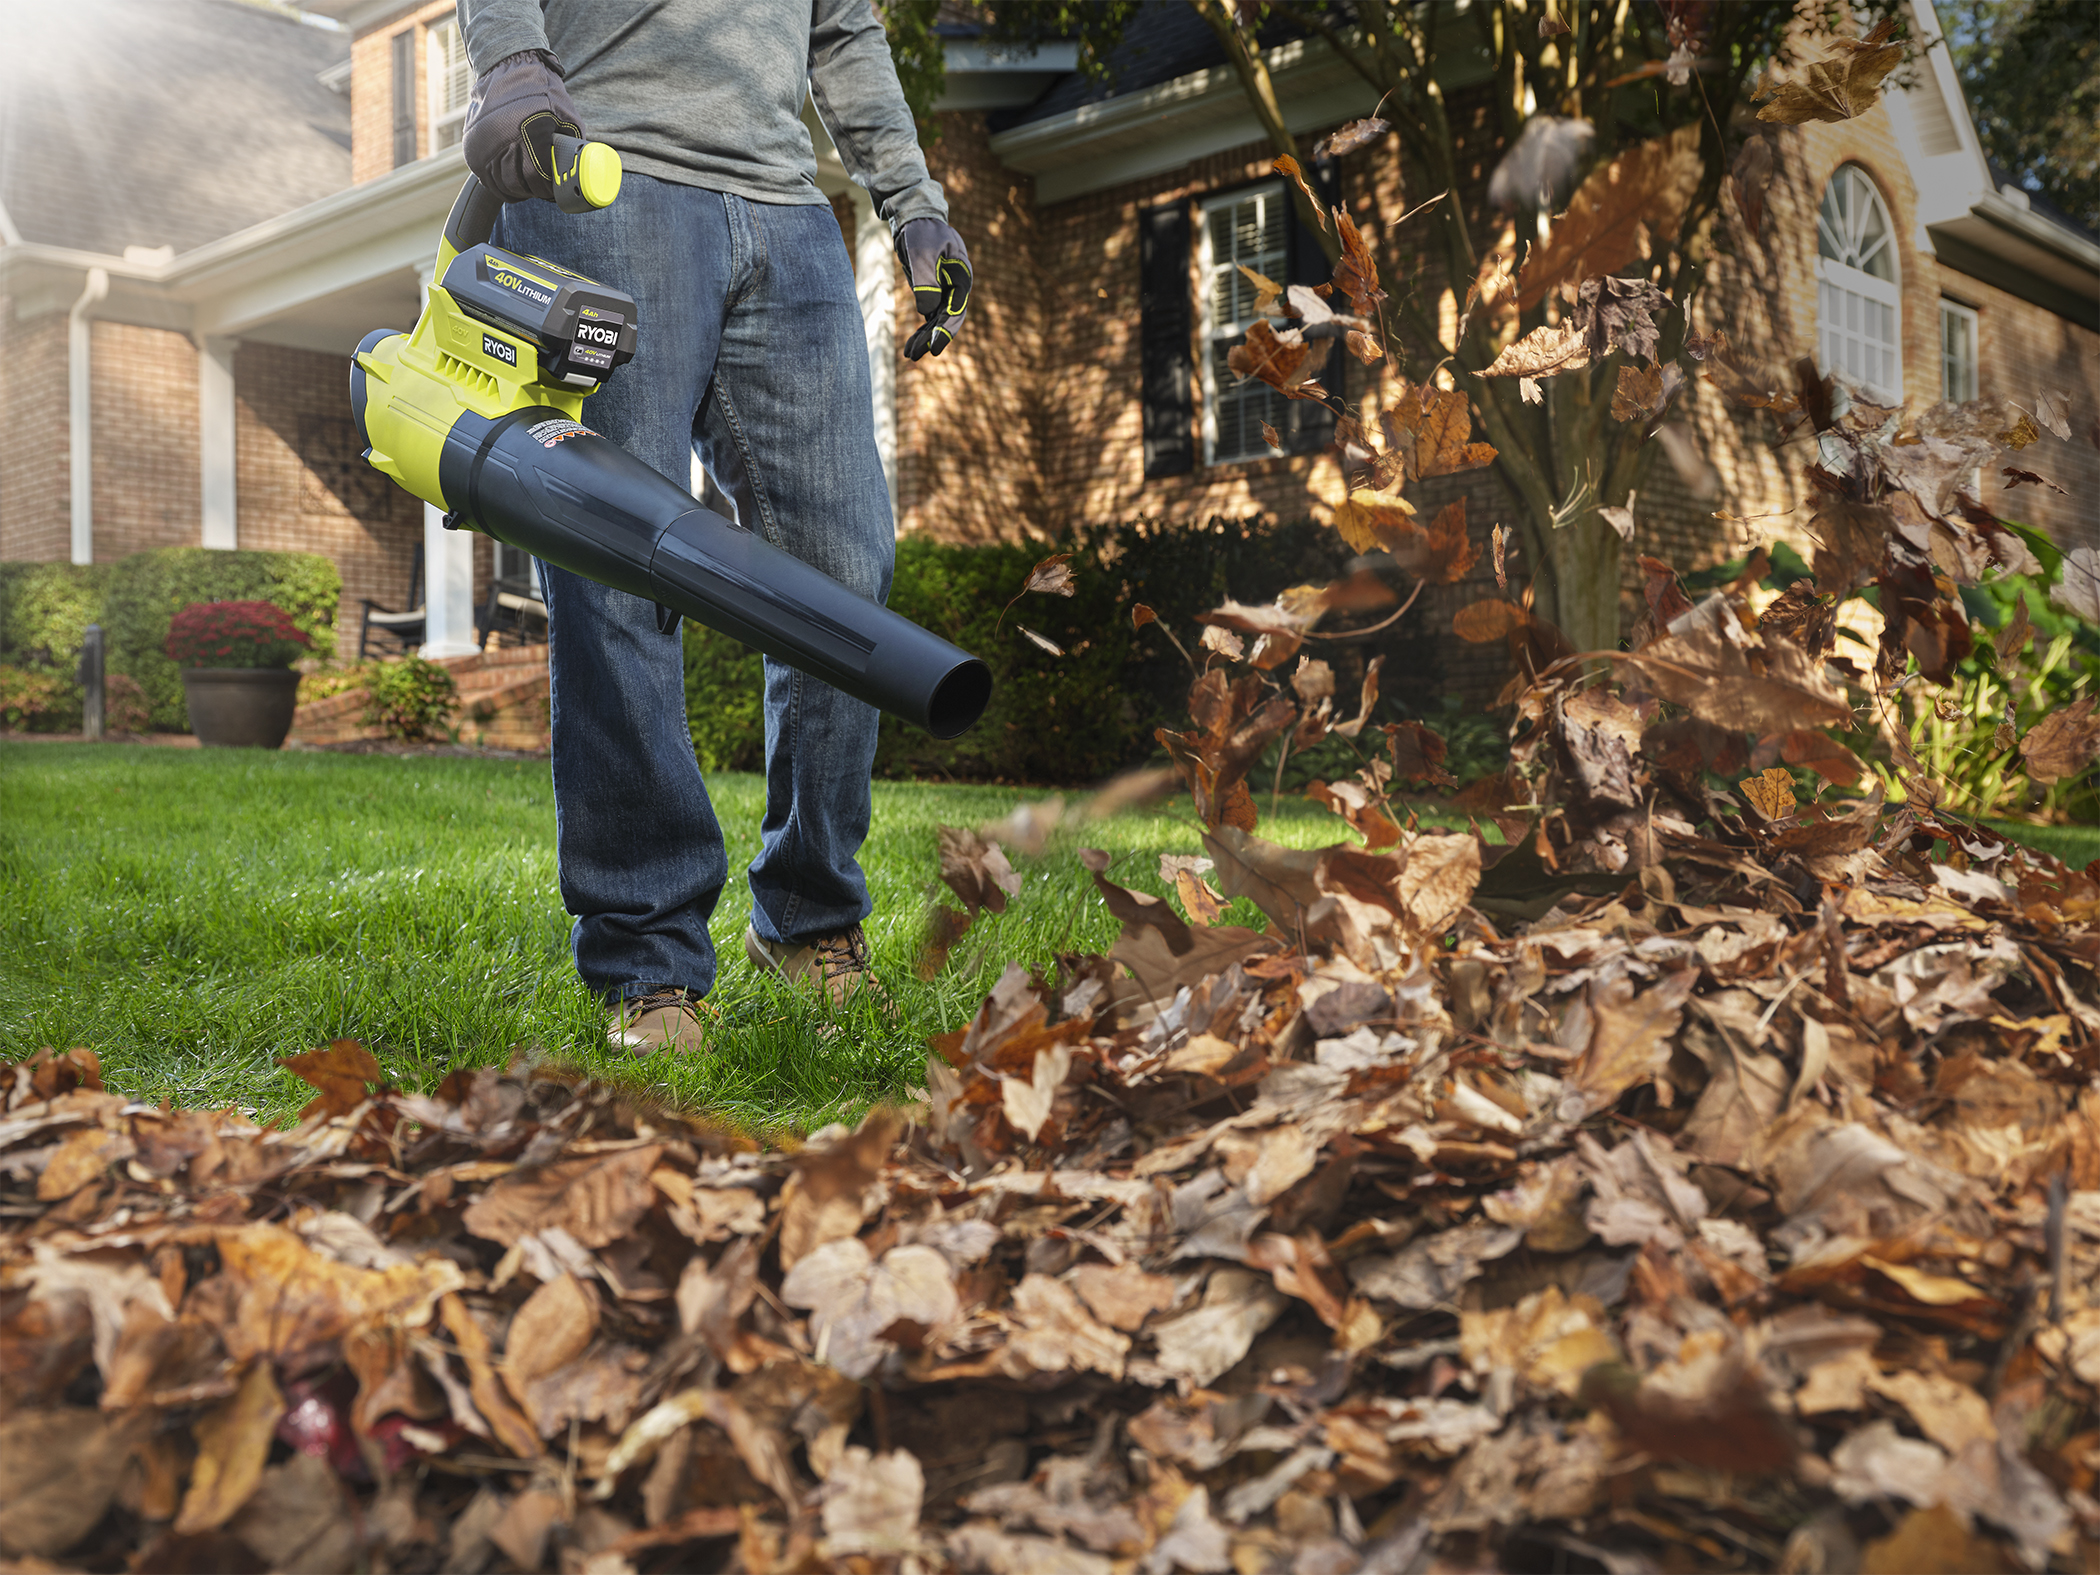 A man wearing jeans is seen from waist-down operating a leaf blower.